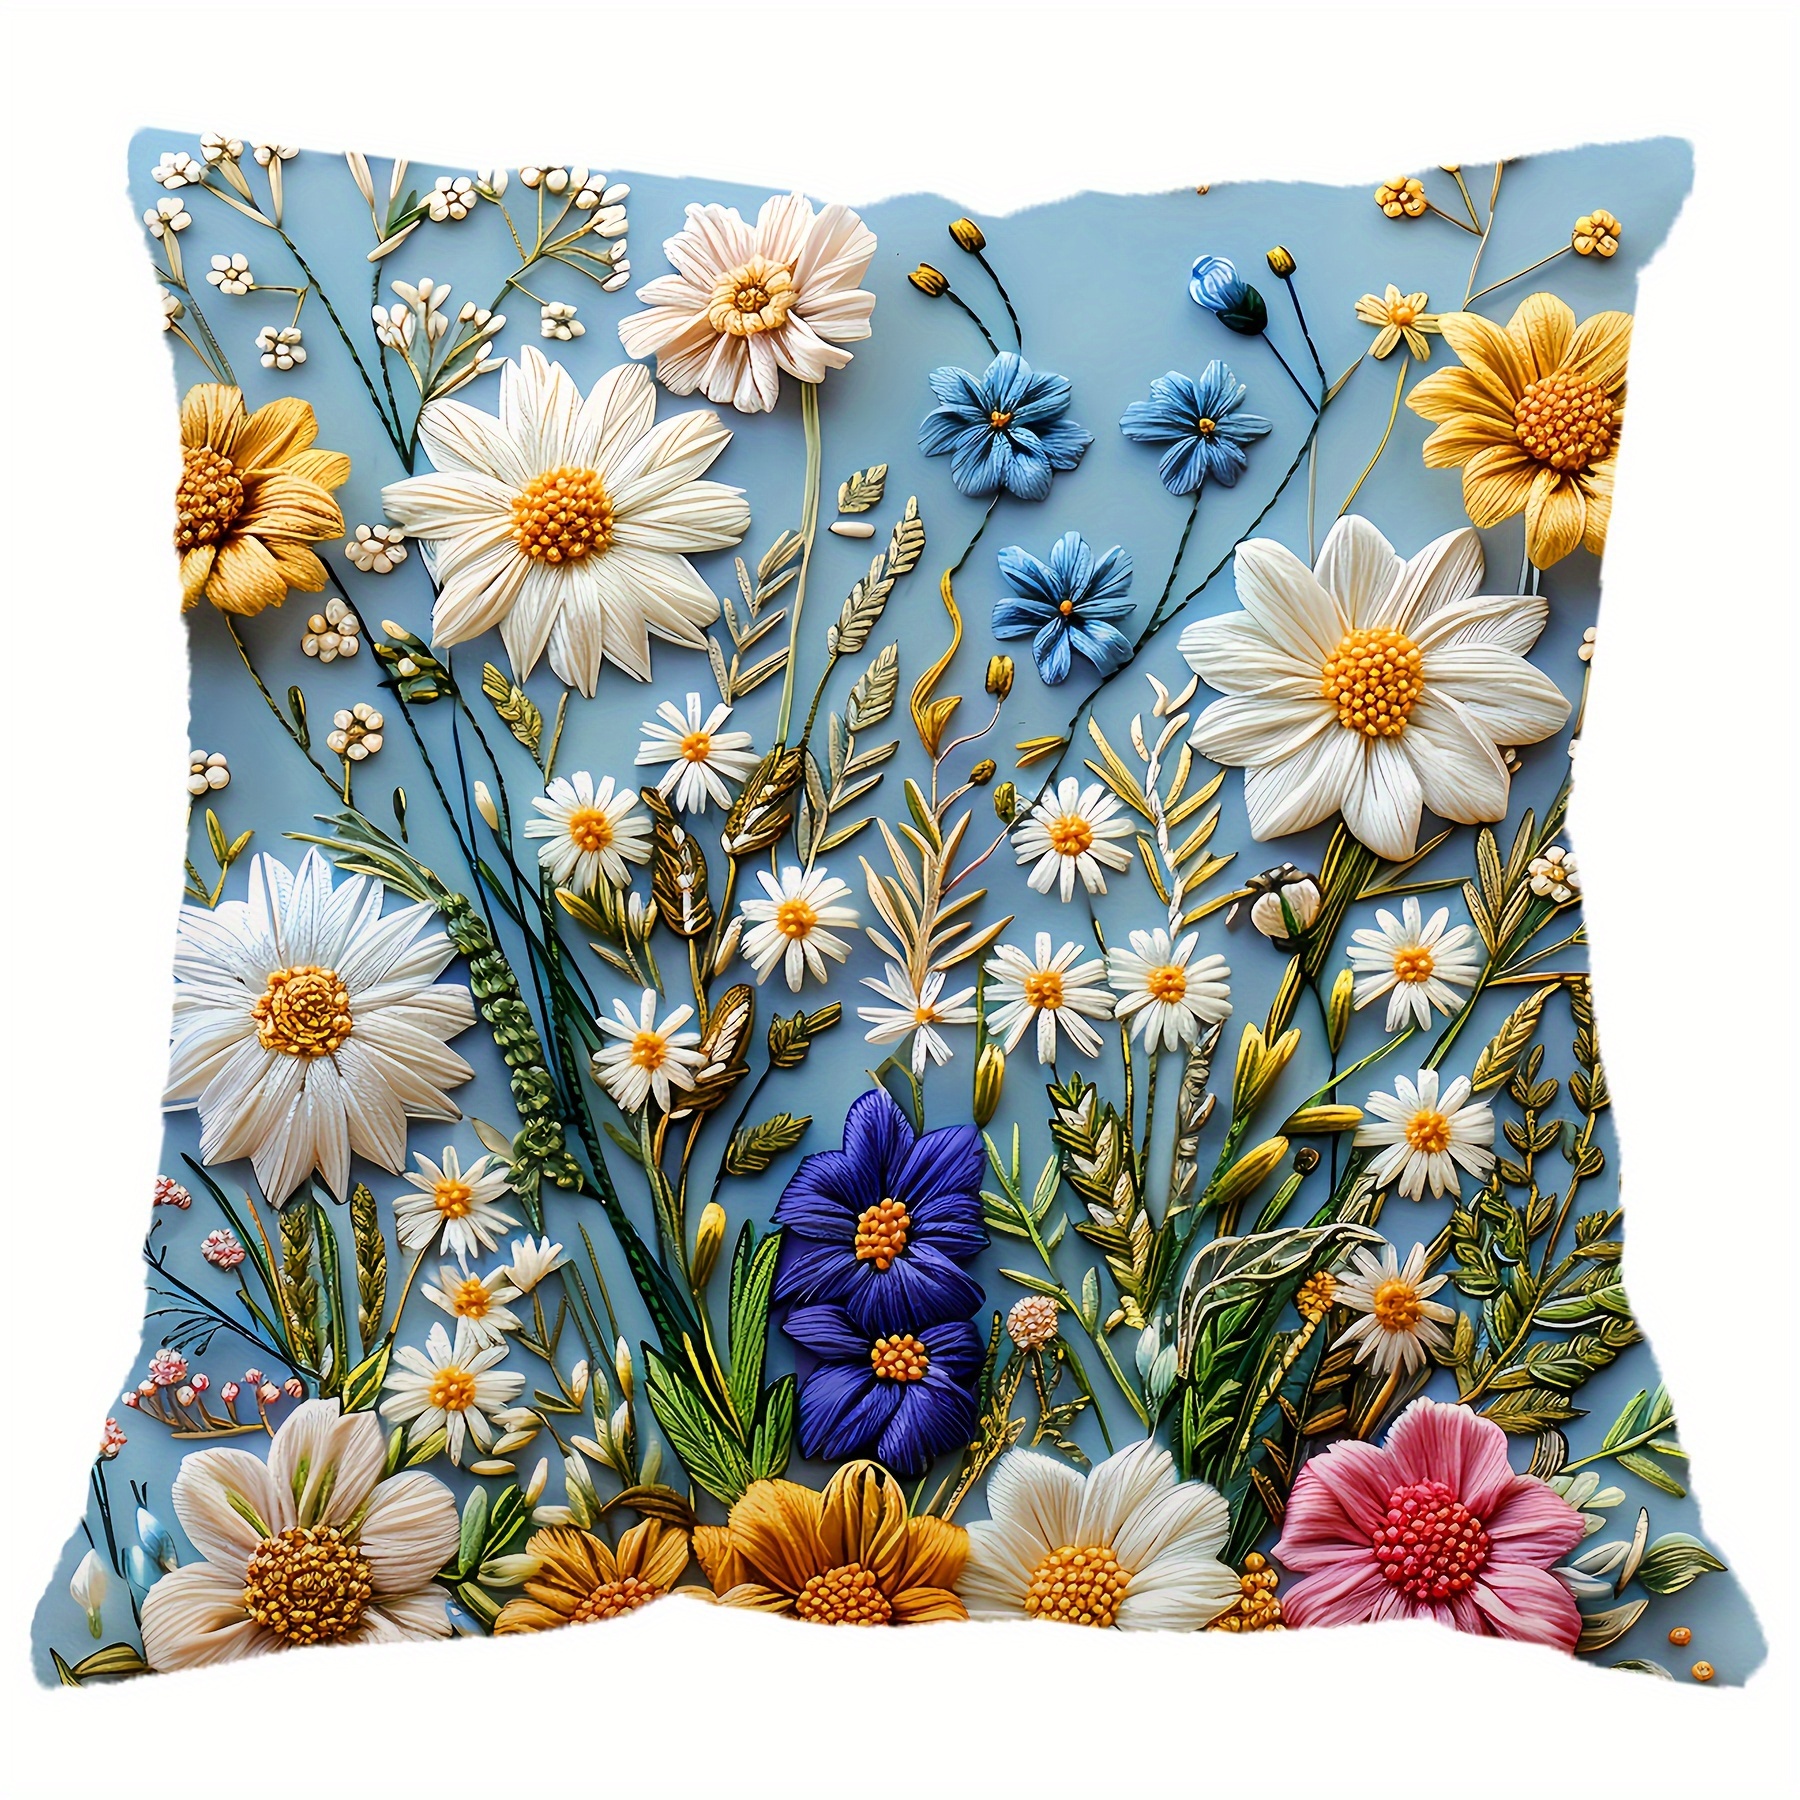 

Contemporary Floral Throw Pillow Cover, 3d Daisy And Botanical Print, Hand Washable Polyester Cushion Case With Zipper, Decorative Single-sided 17.7" Square For Various Room Sofa And Bedroom - 1pc